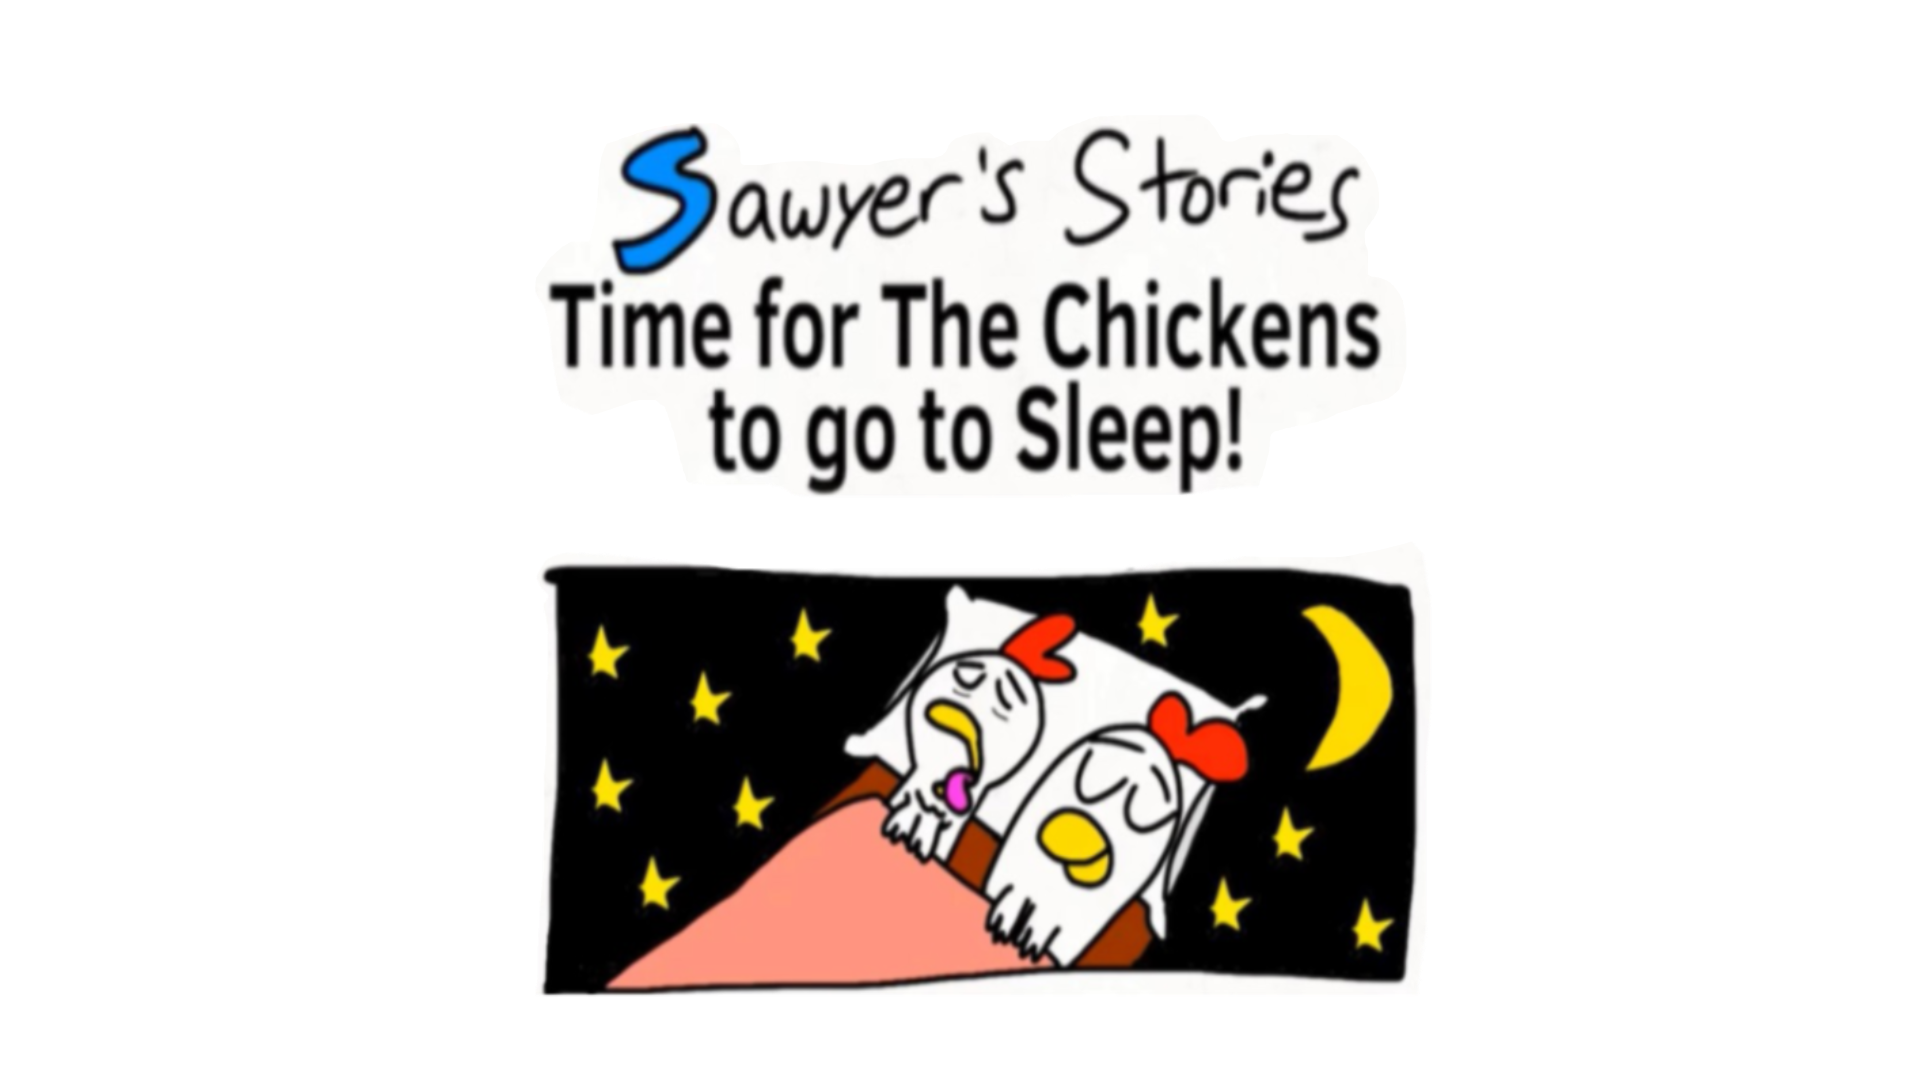 Sawyer's Stories: Time for The Chickens to go to Sleep (Game Boy Advance)